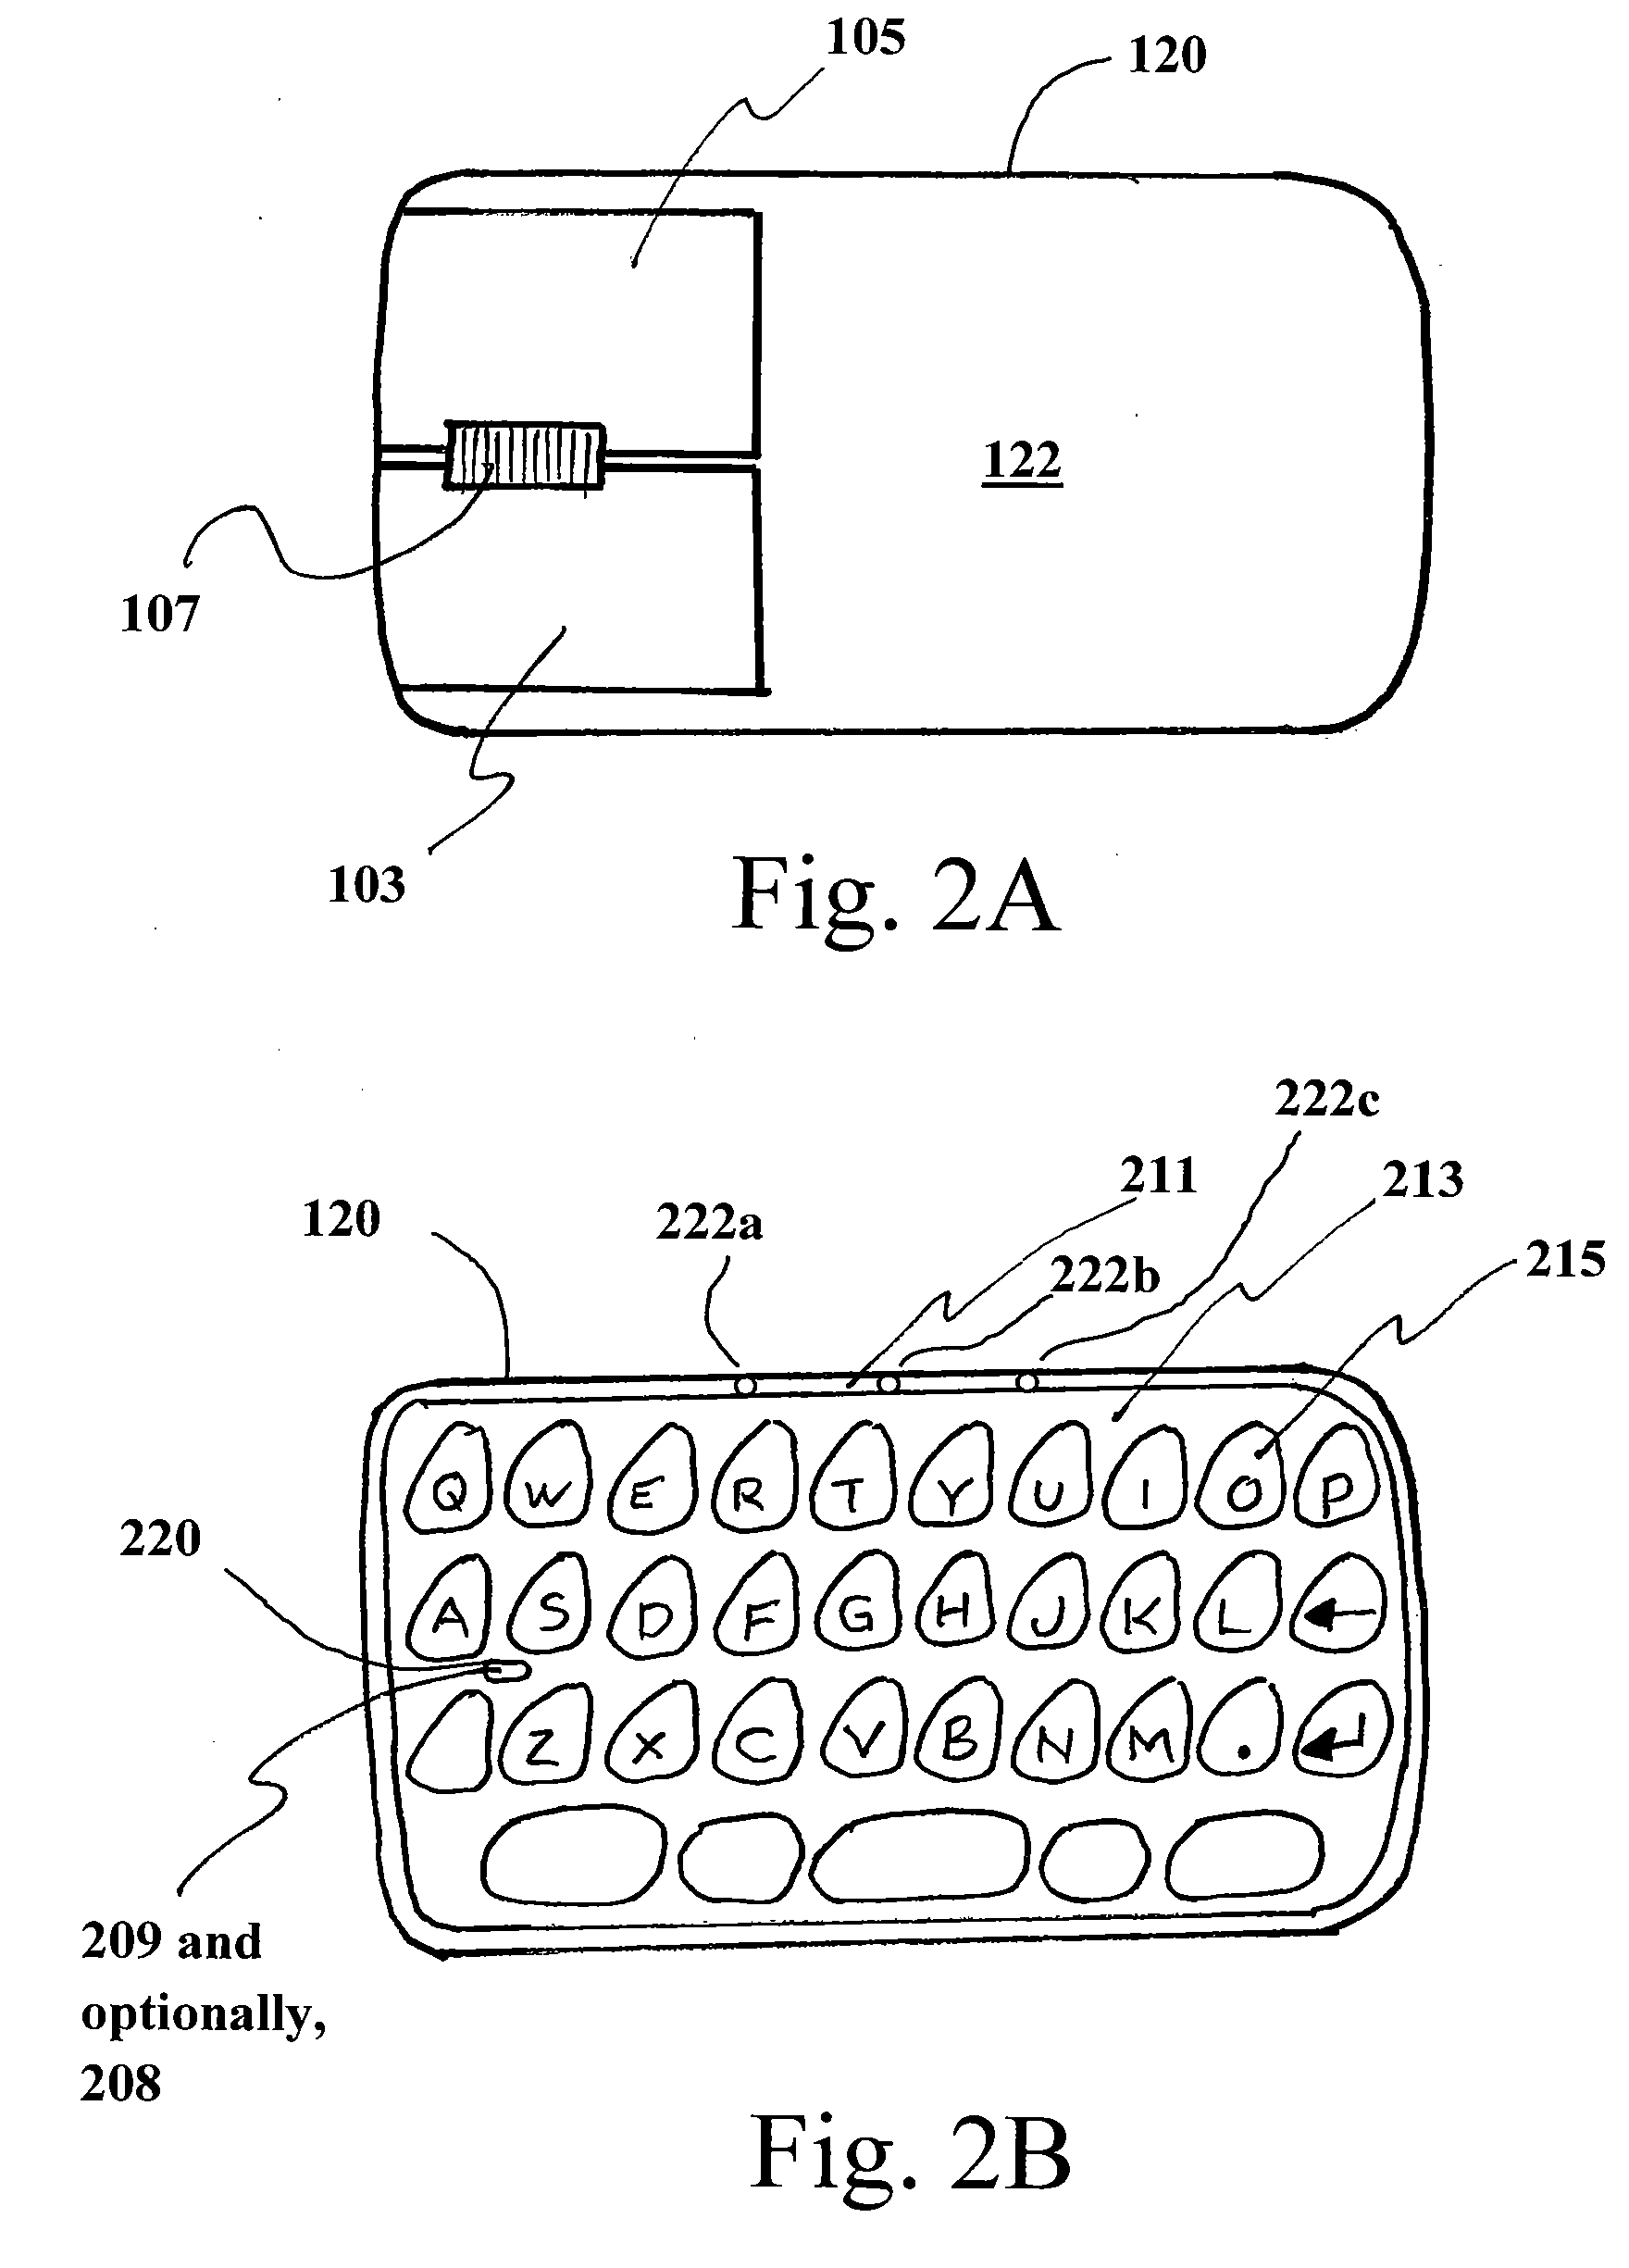 Combination thumb keyboard and mouse